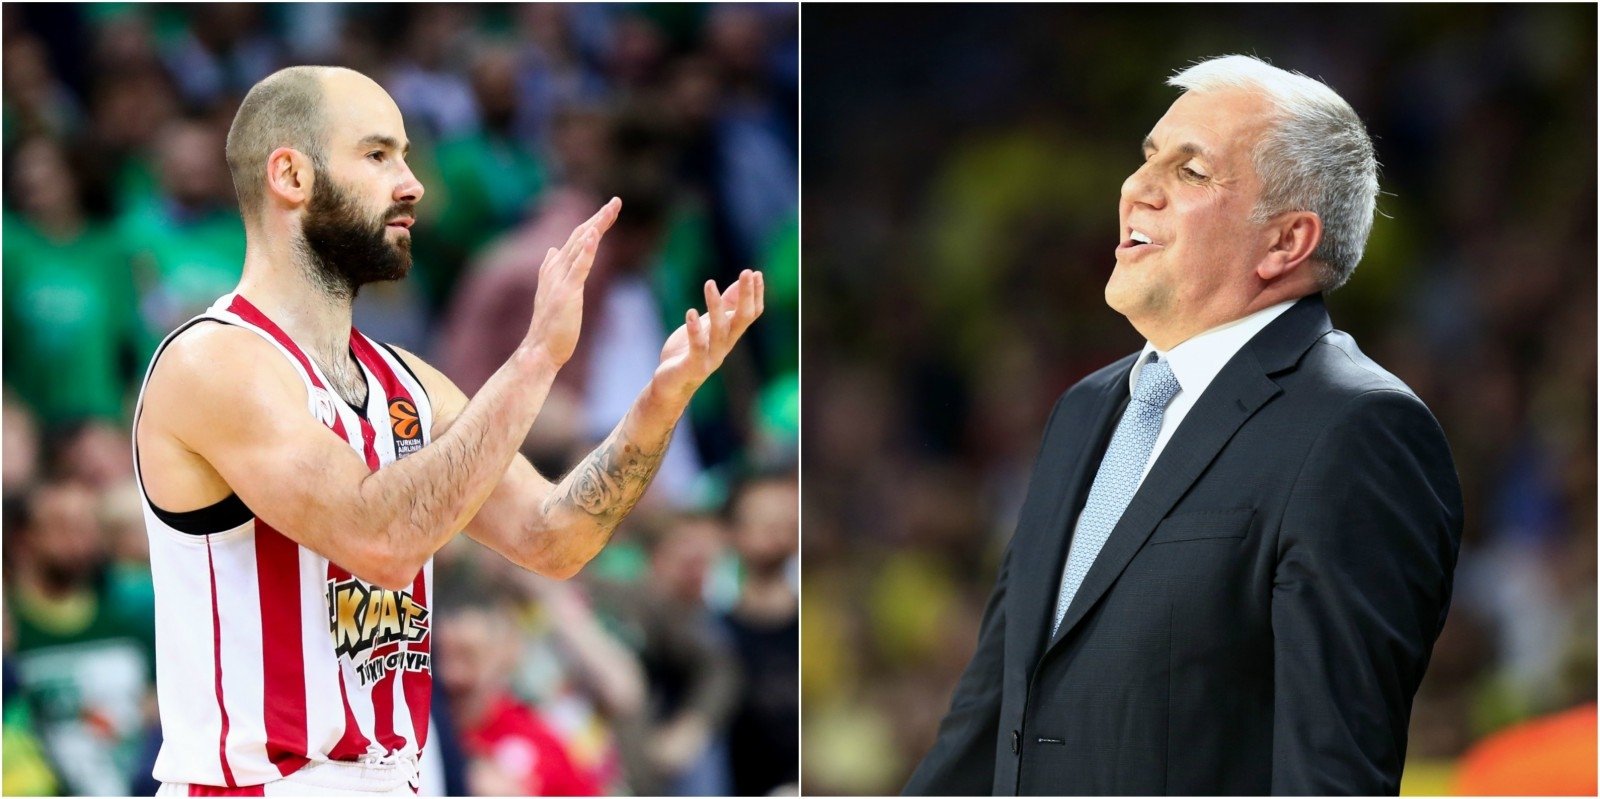 Spanoulis : Spanoulis becomes the Euroleague player with the most ... - This page features all the information related to the nba basketball player vassilis spanoulis: